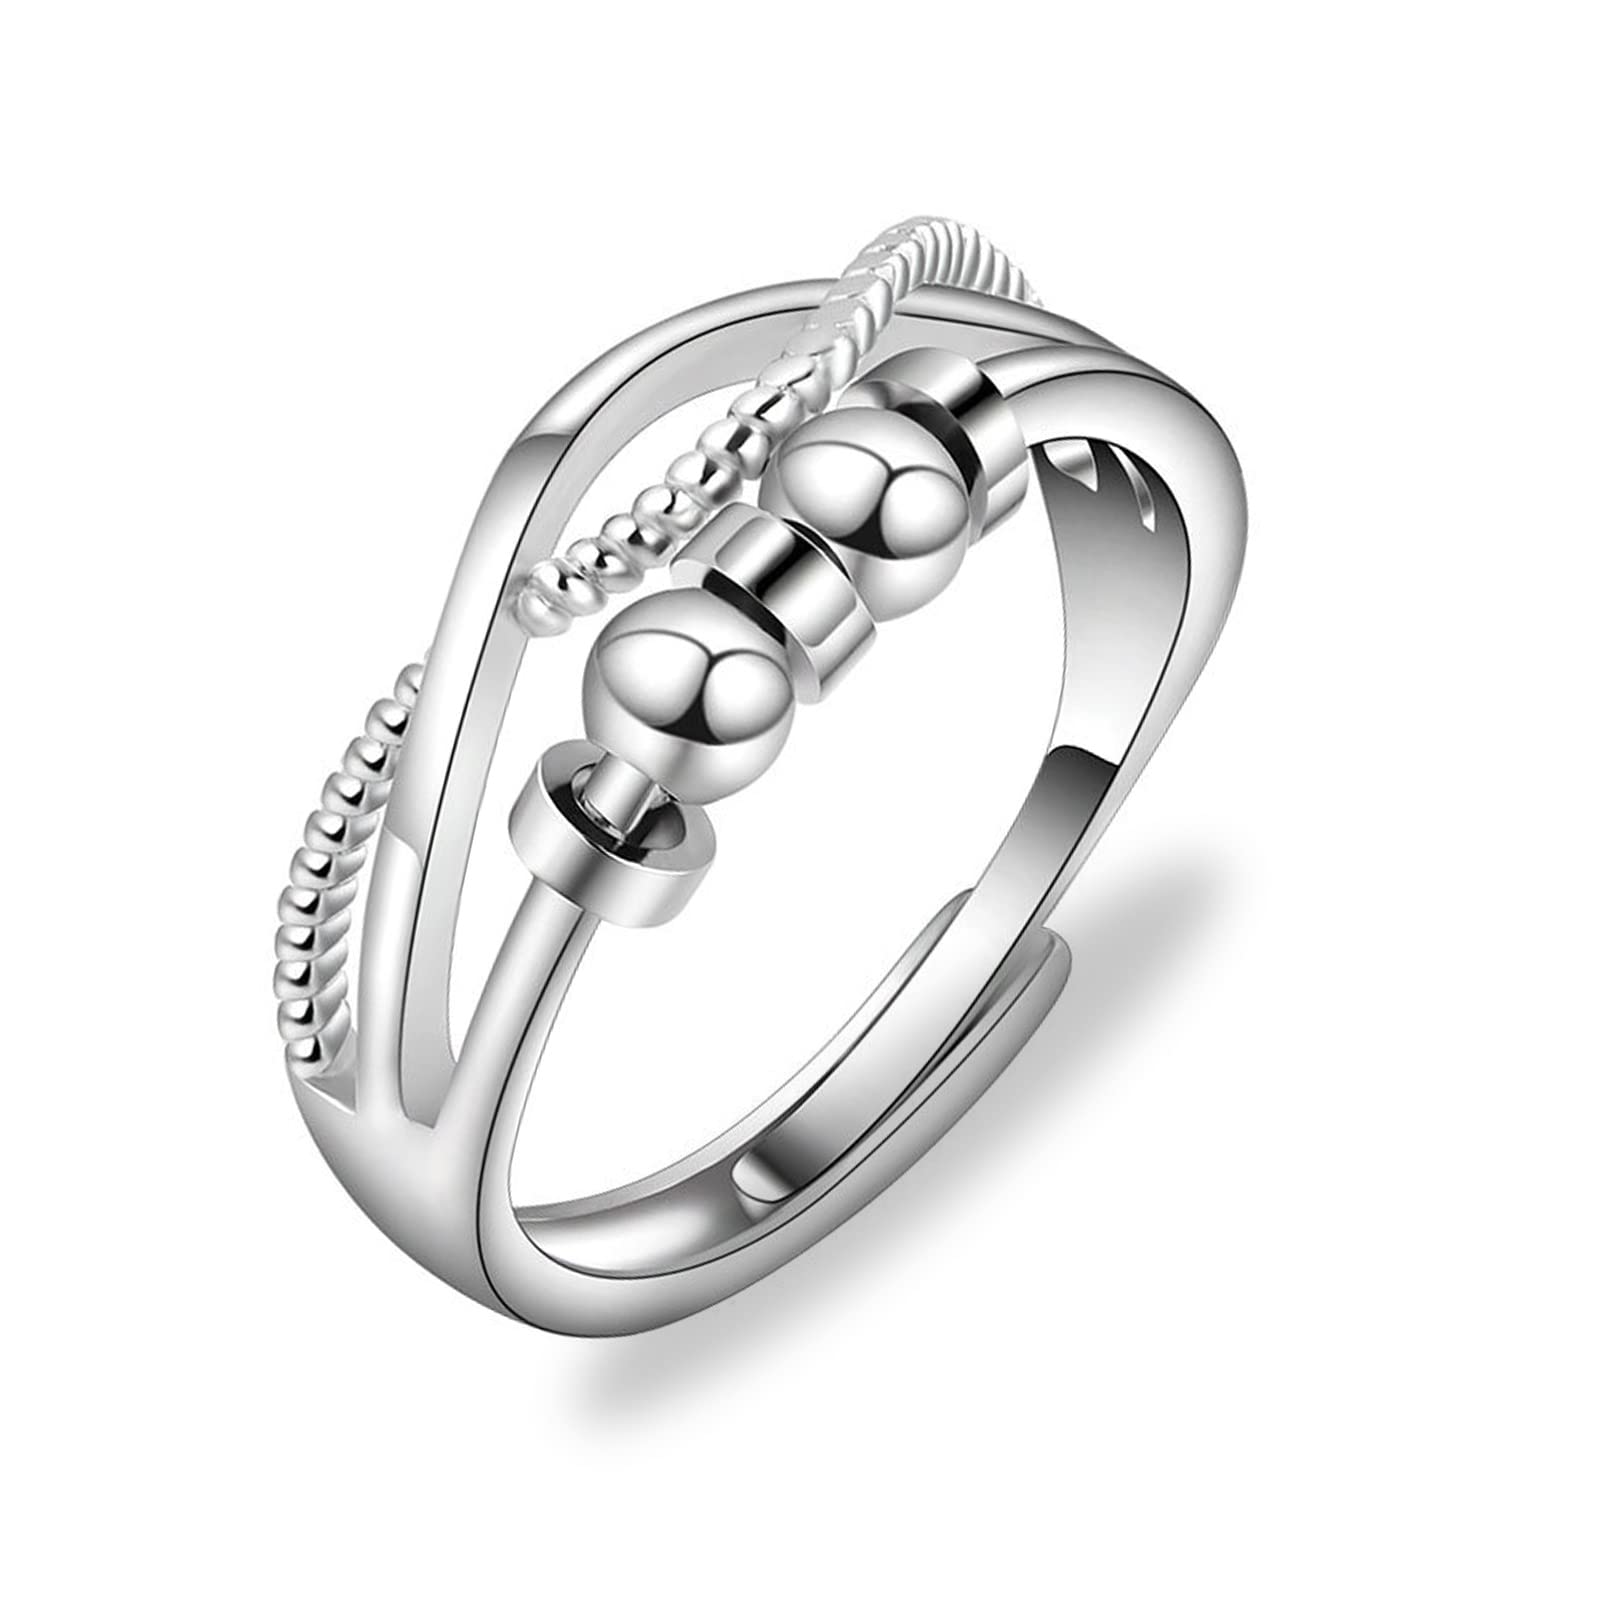 FUNTE Silver Fidget Rings for Anxiety Women - 925 Sterling Silver Silver Anxiety Ring - Adjustable Beads Stress Relieving Spinner Ring -Cubic Zirconia Thumb Rings for Stress Relief - With Gift Box